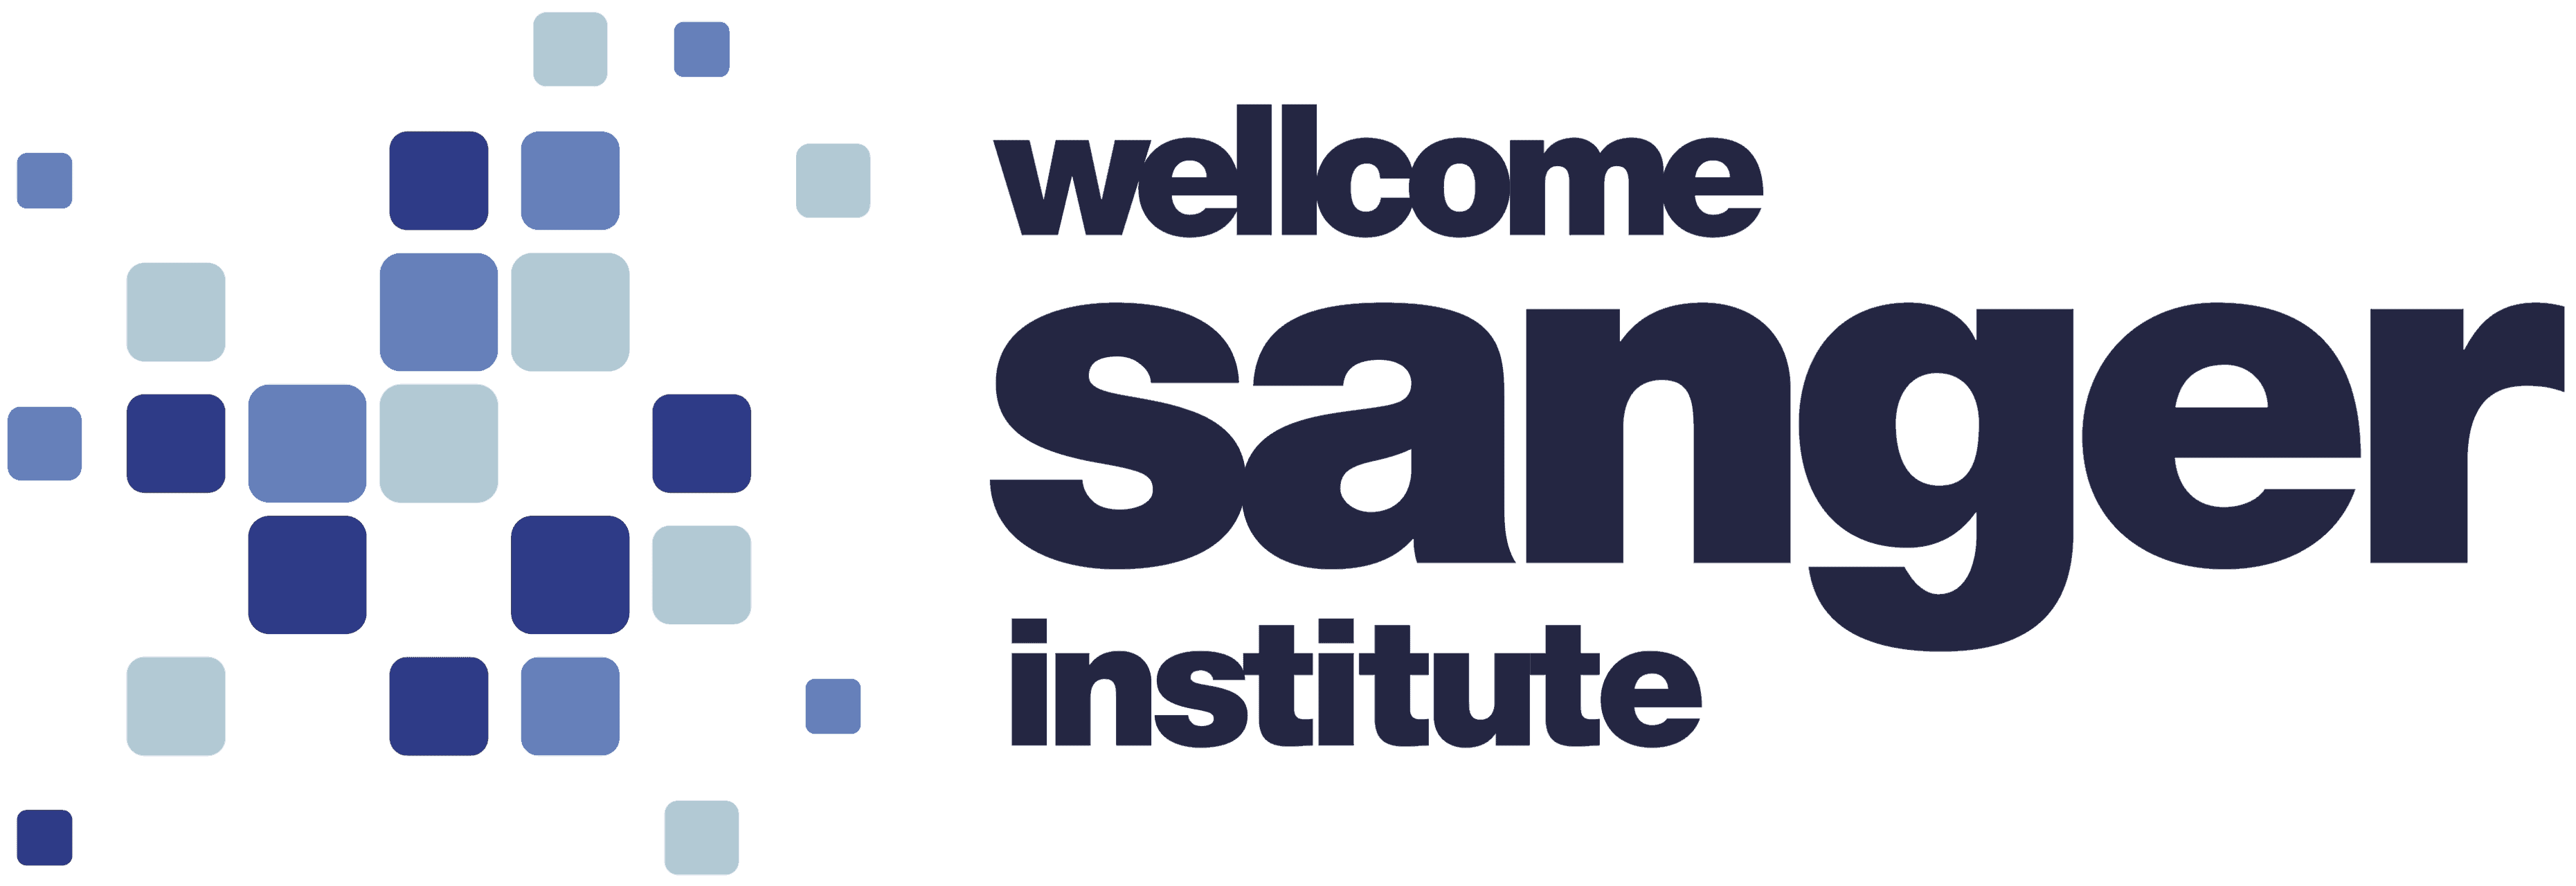 wellcome-sanger-institute-custommer-success-story